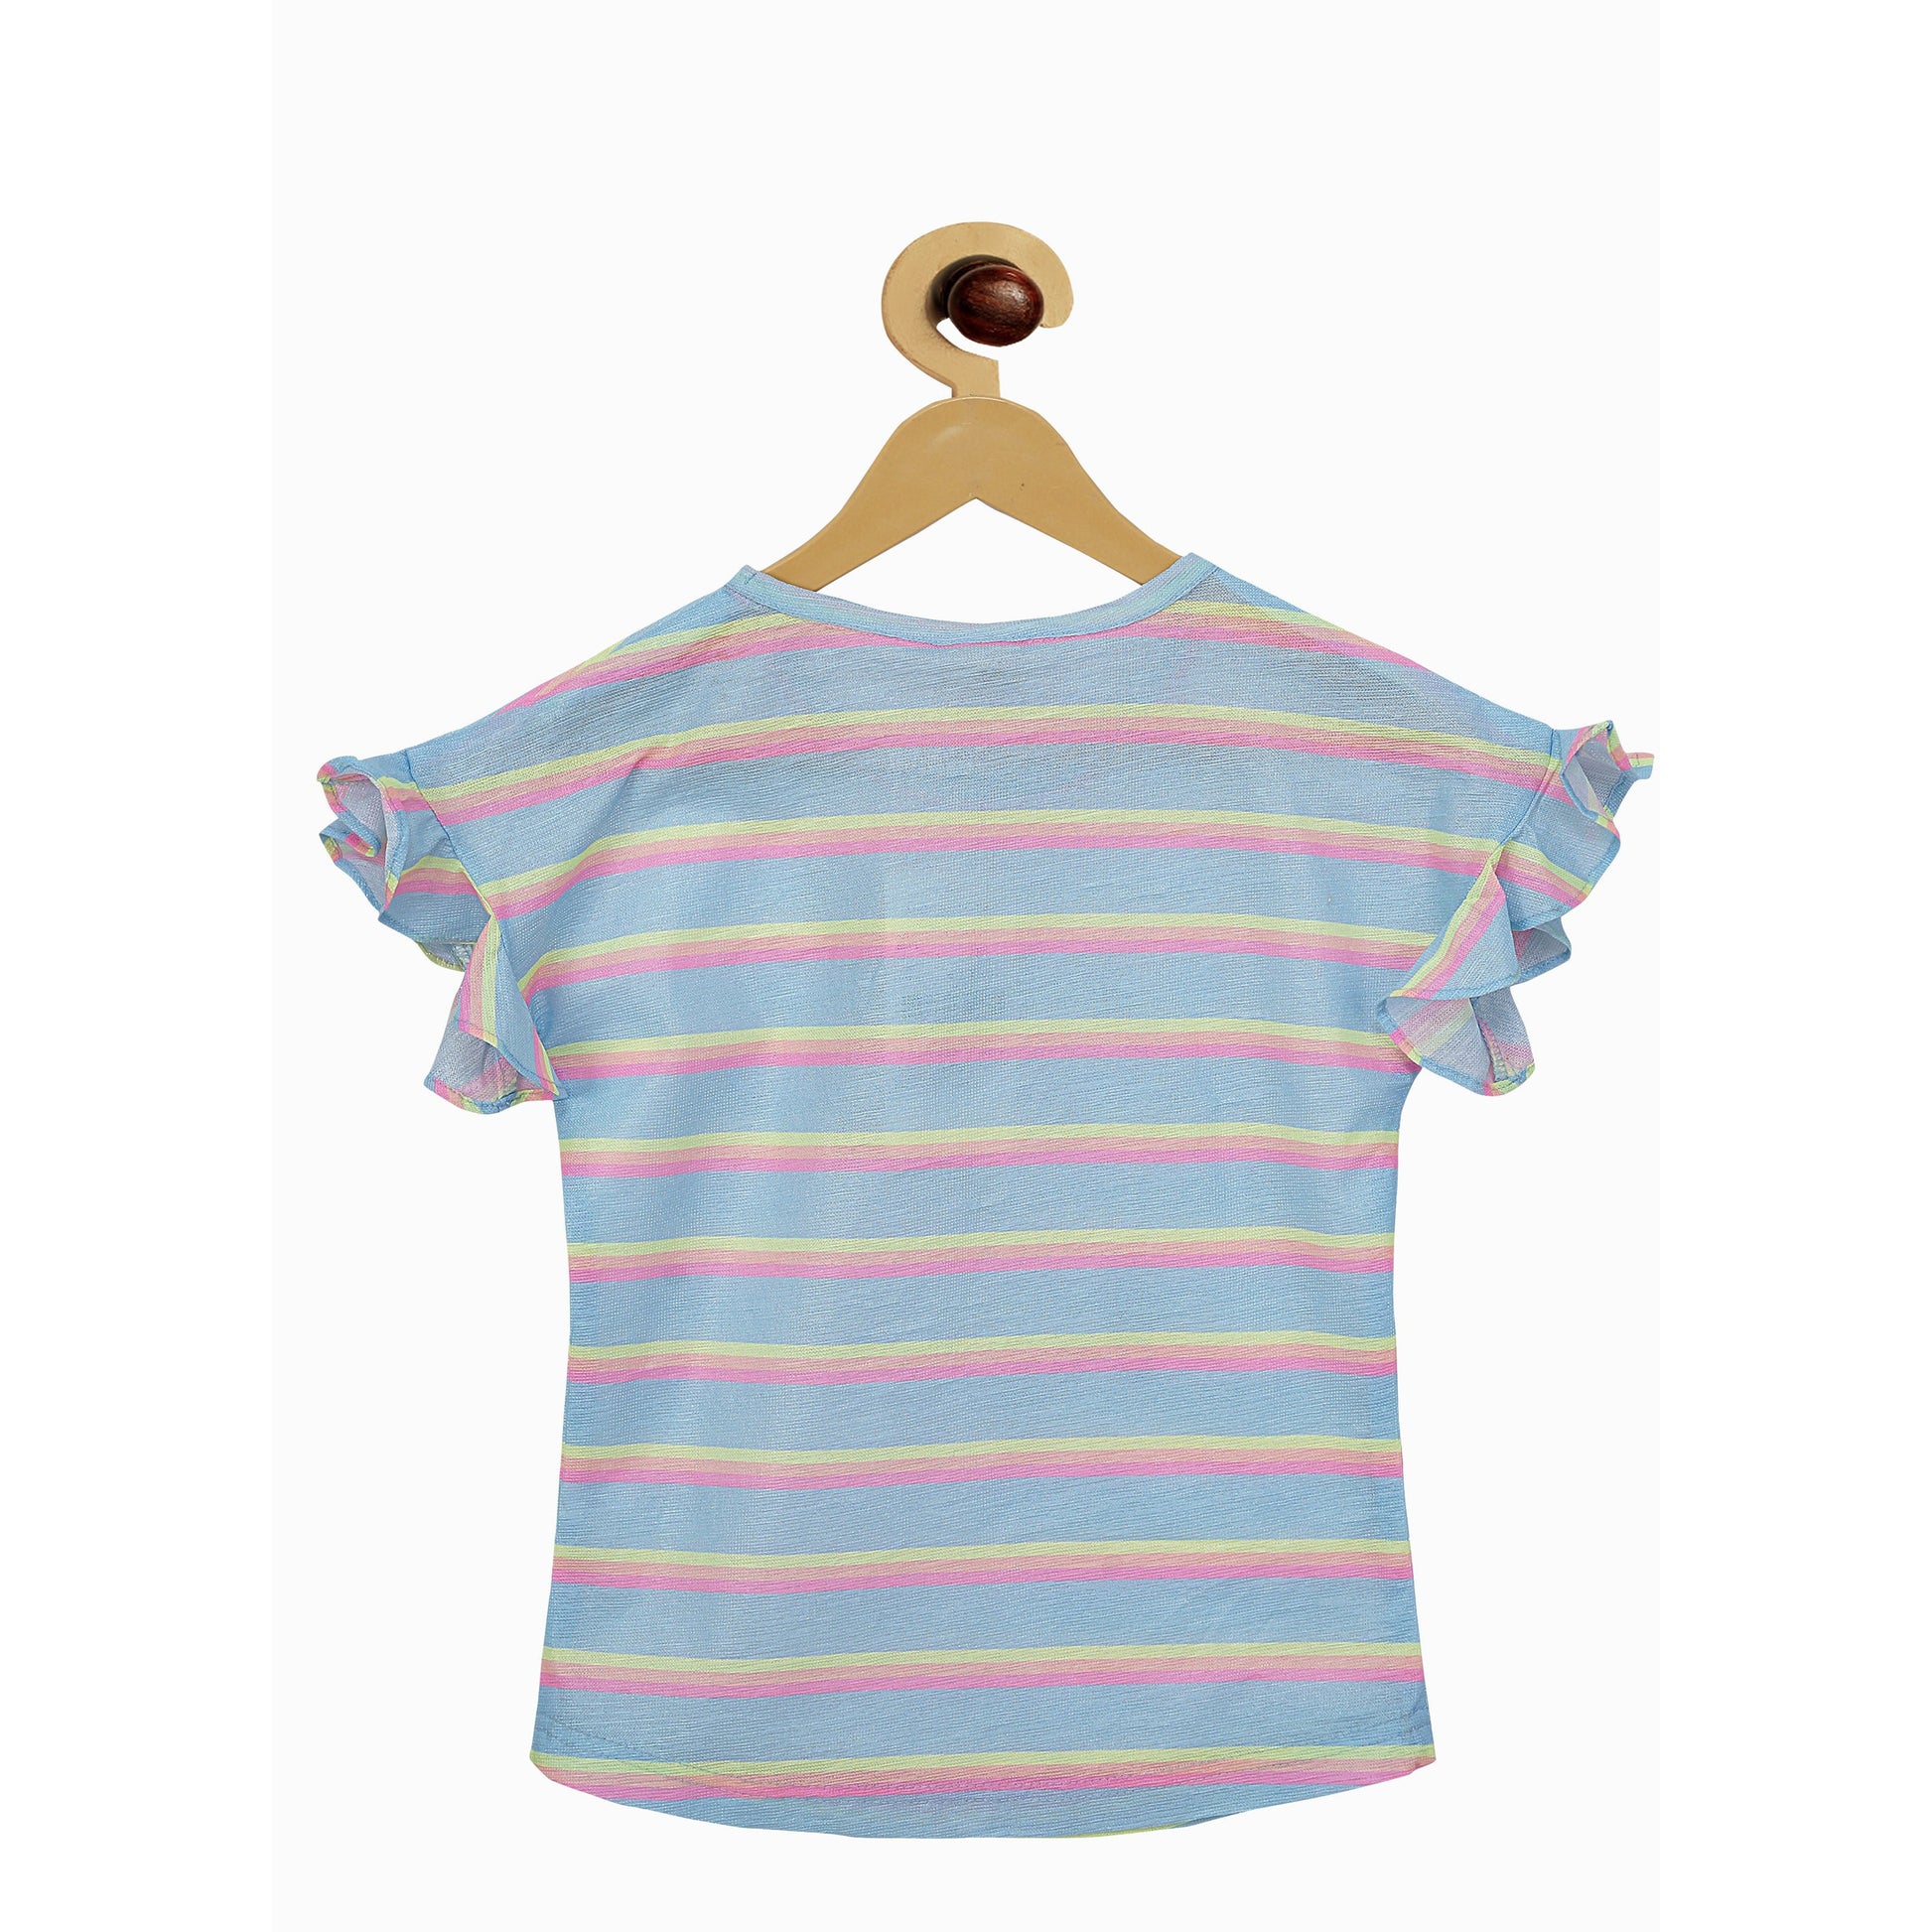 Tiny Girl Printed Casual Top